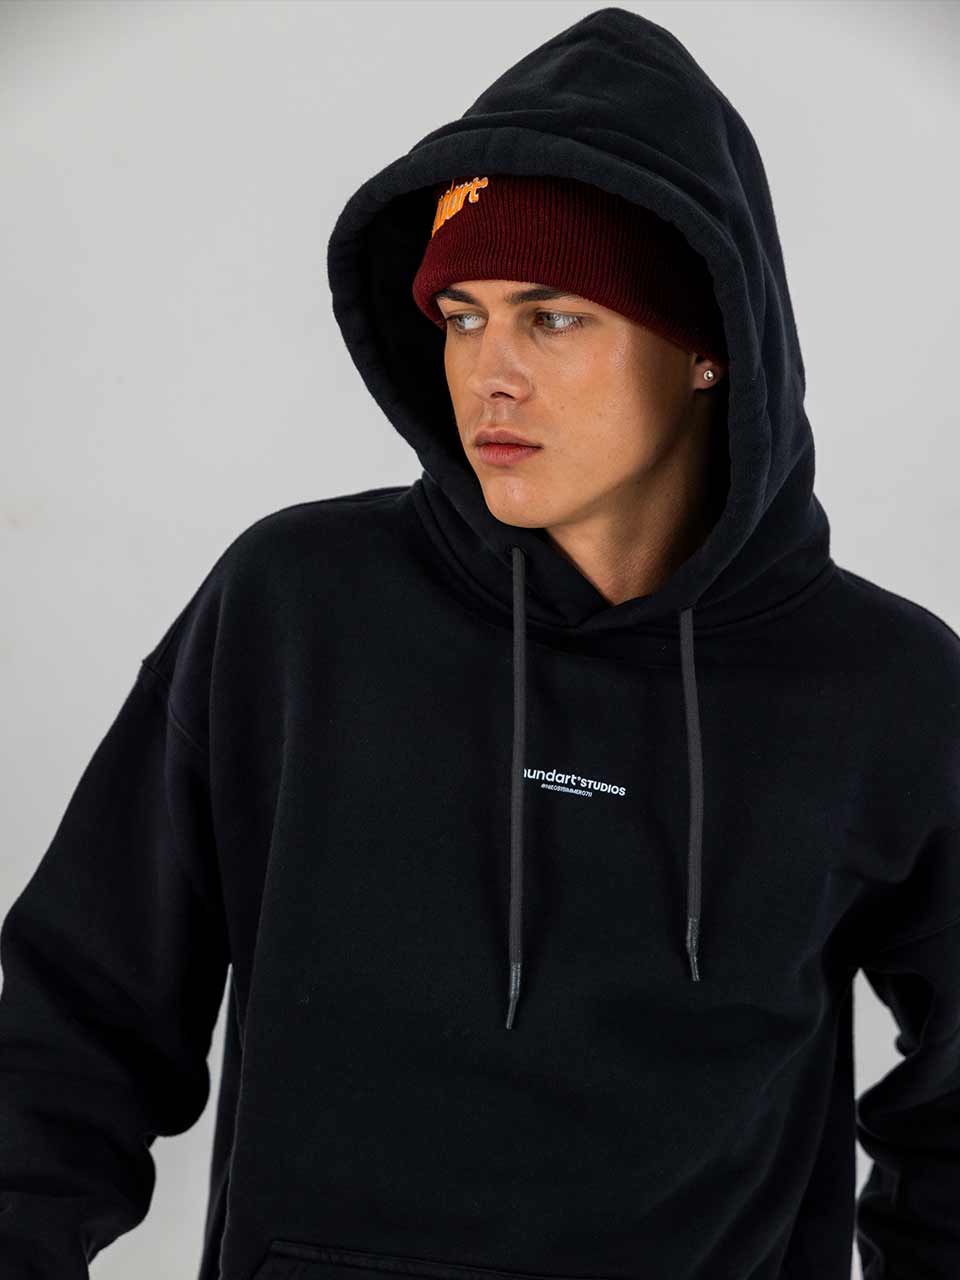 Chaval-Hoody Black - made in portugal